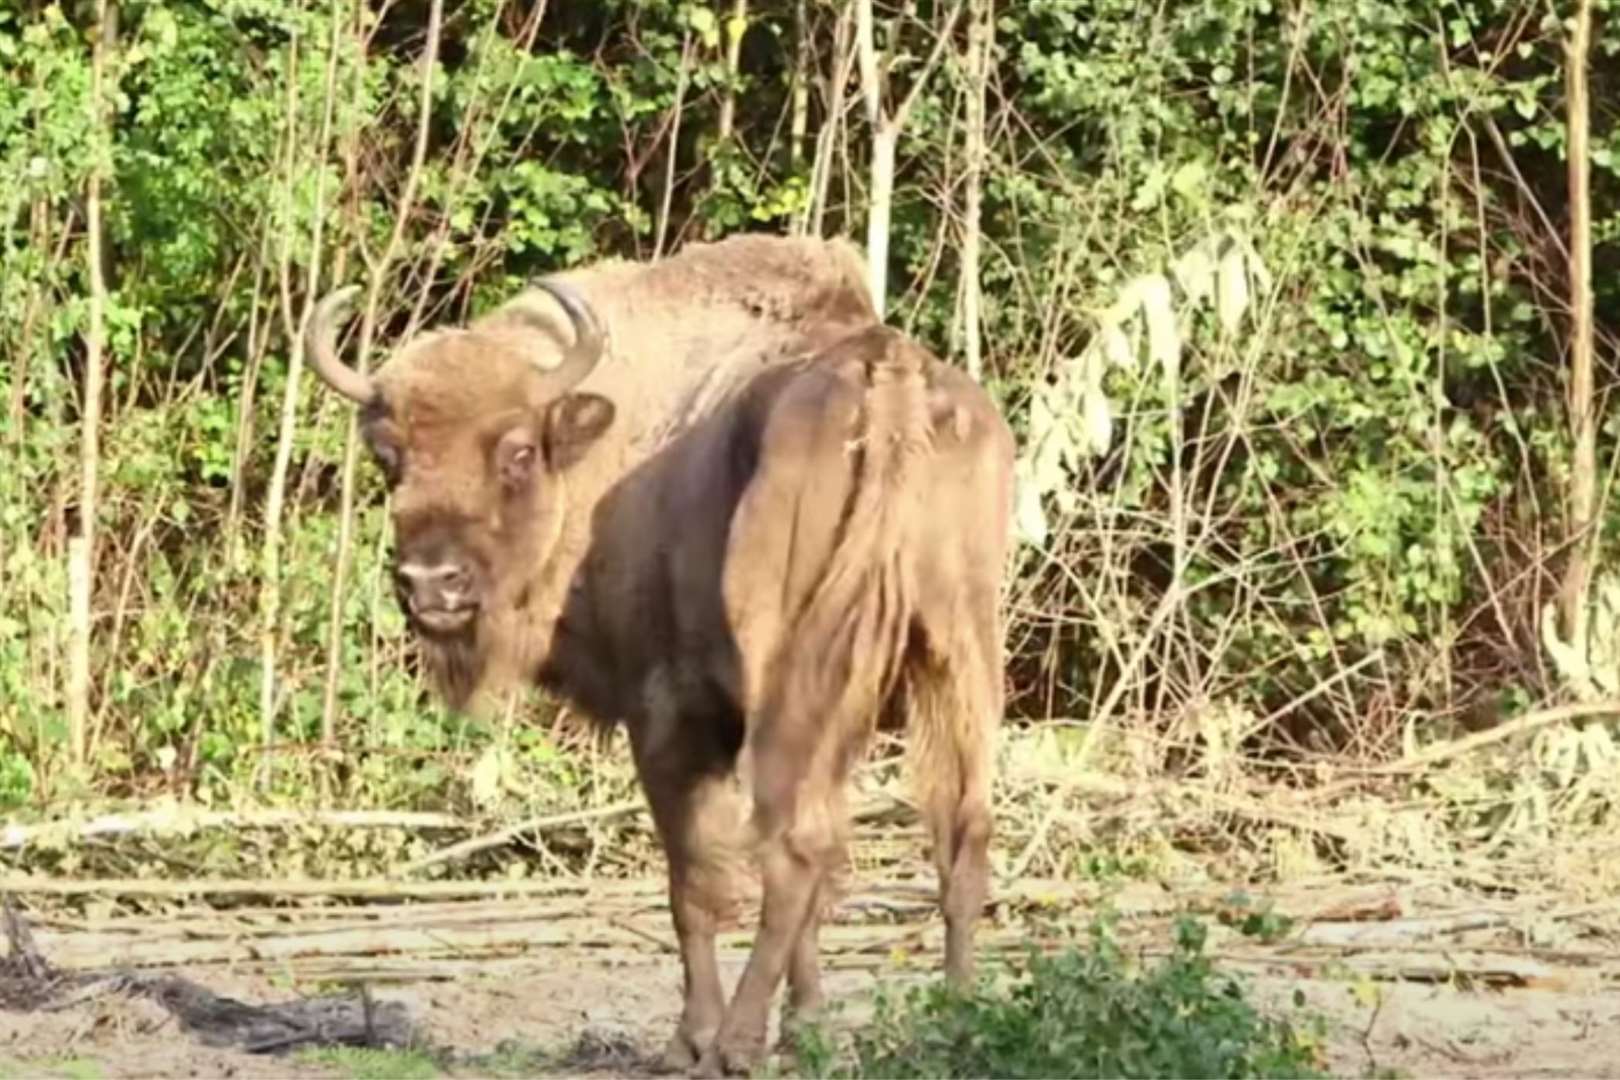 Bison released in Kent woodland this morning